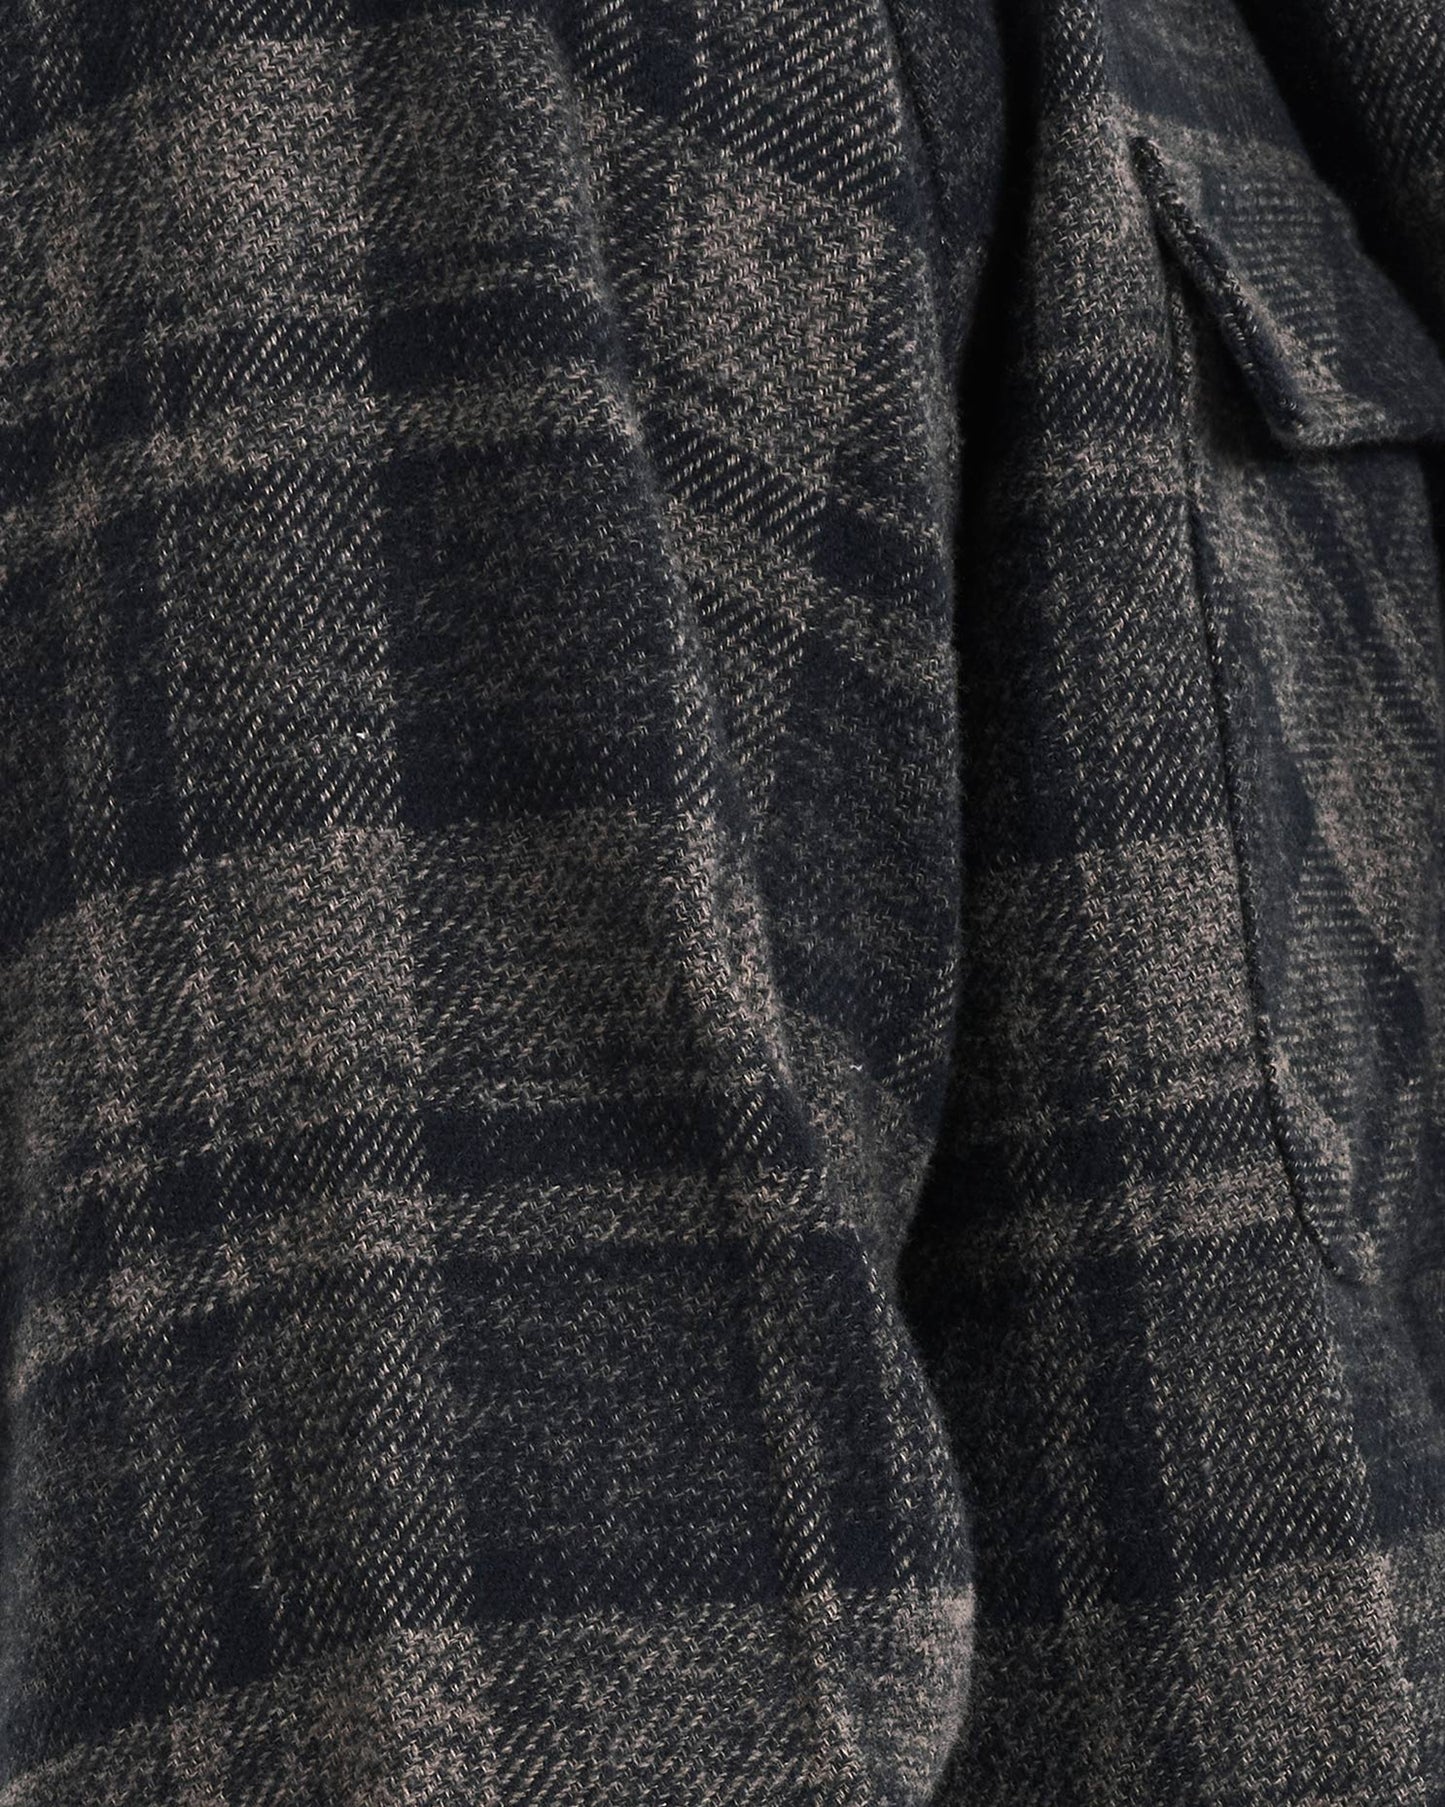 JAPANESE WOVEN FLANNEL